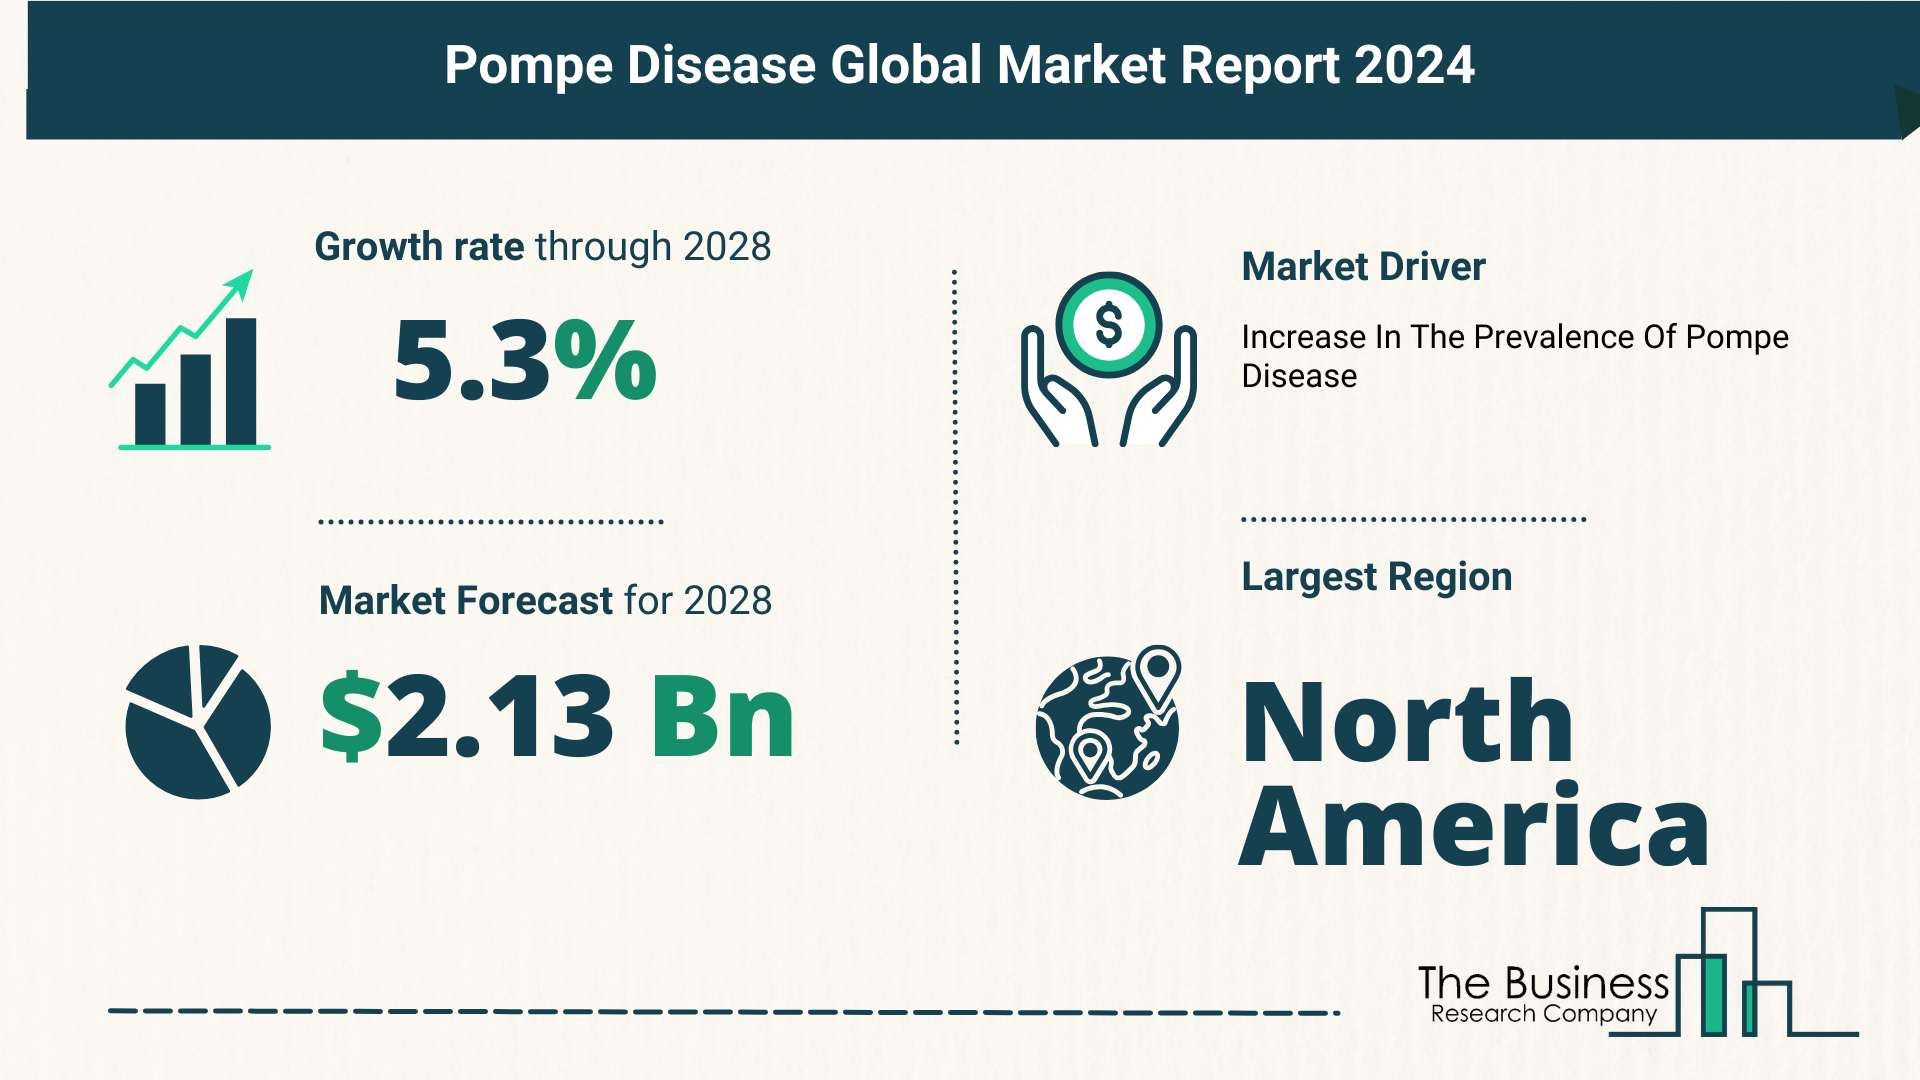 Key Trends And Drivers In The Pompe Disease Market 2024